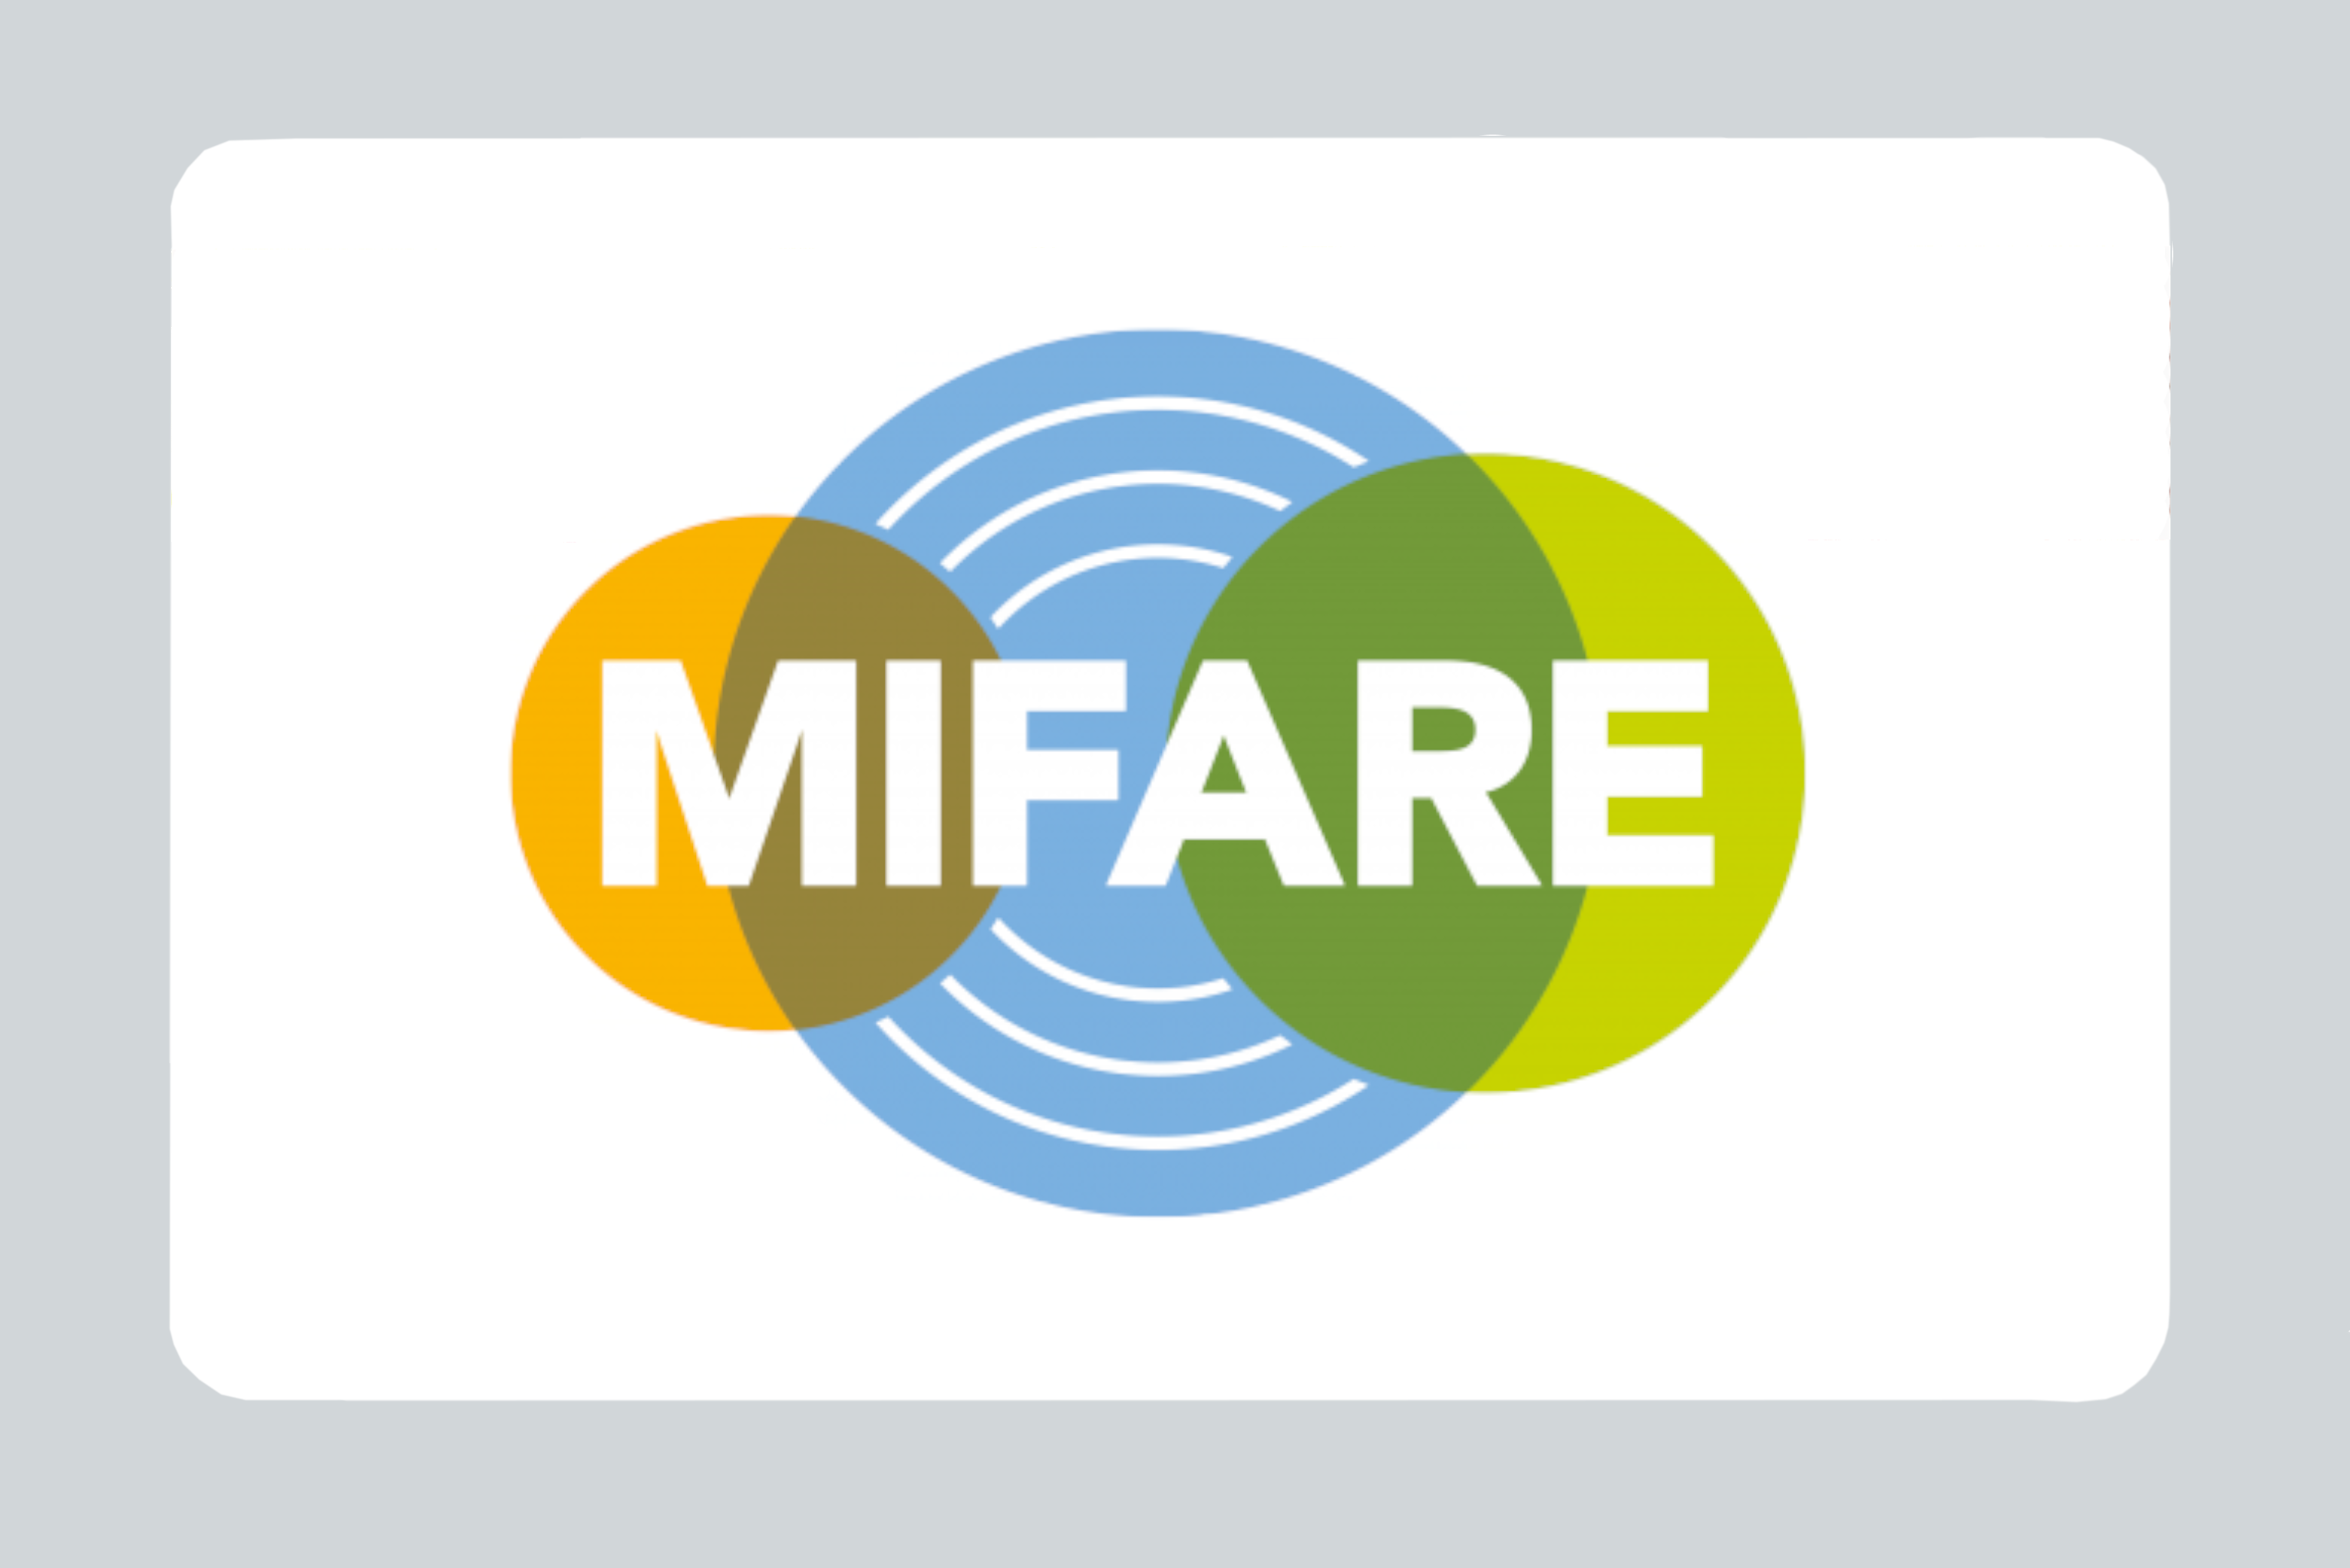 MIFARE contactless cards